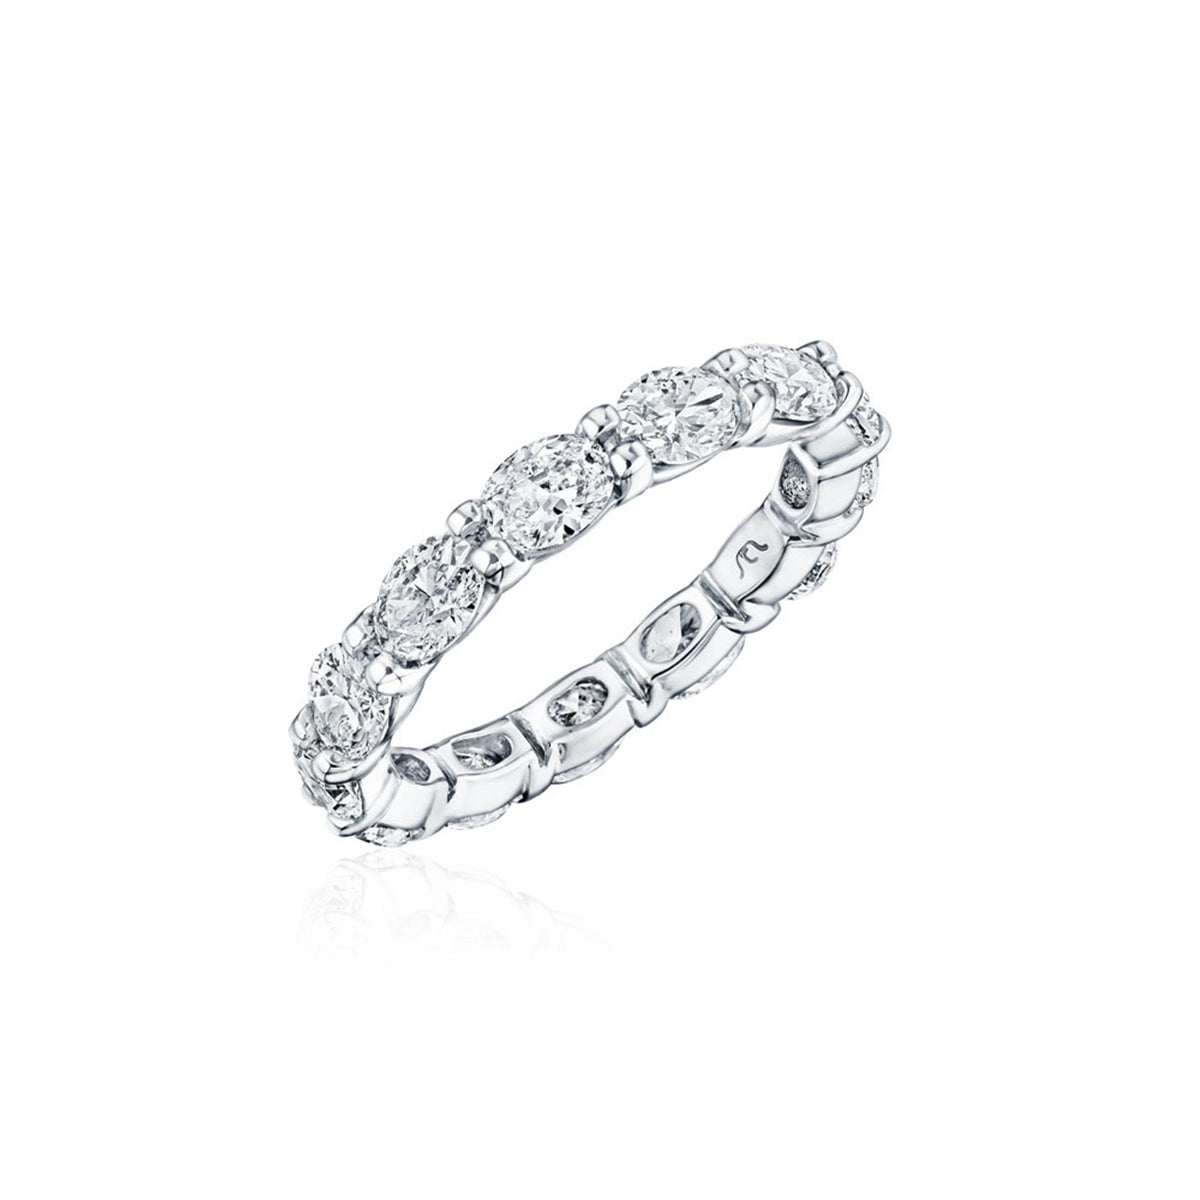 14Kt White Gold Eternity Wedding Ring With 2.47cttw Oval Natural Diamonds